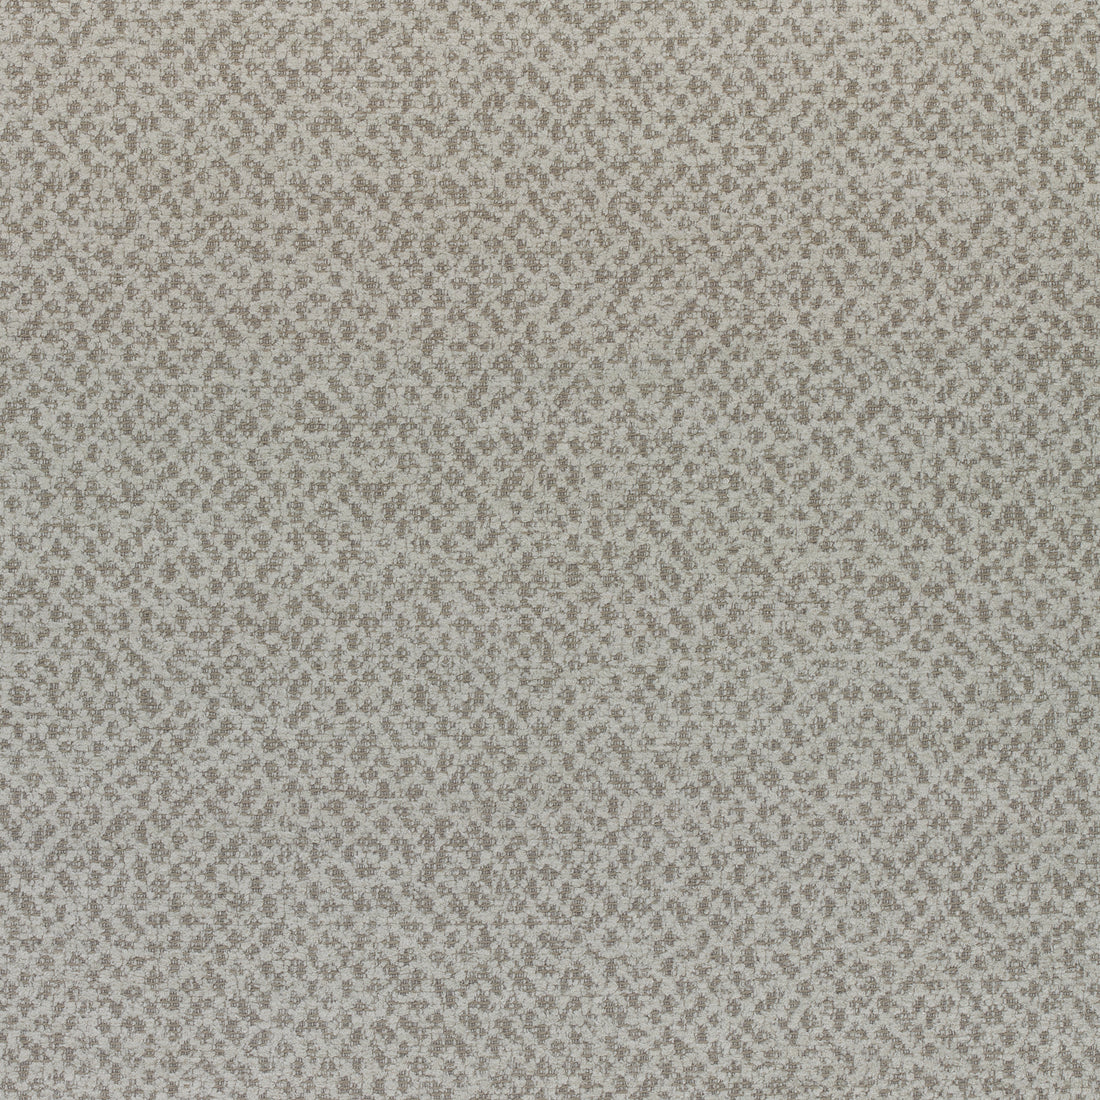 Gryffin fabric in stone color - pattern number W80411 - by Thibaut in the Mosaic collection